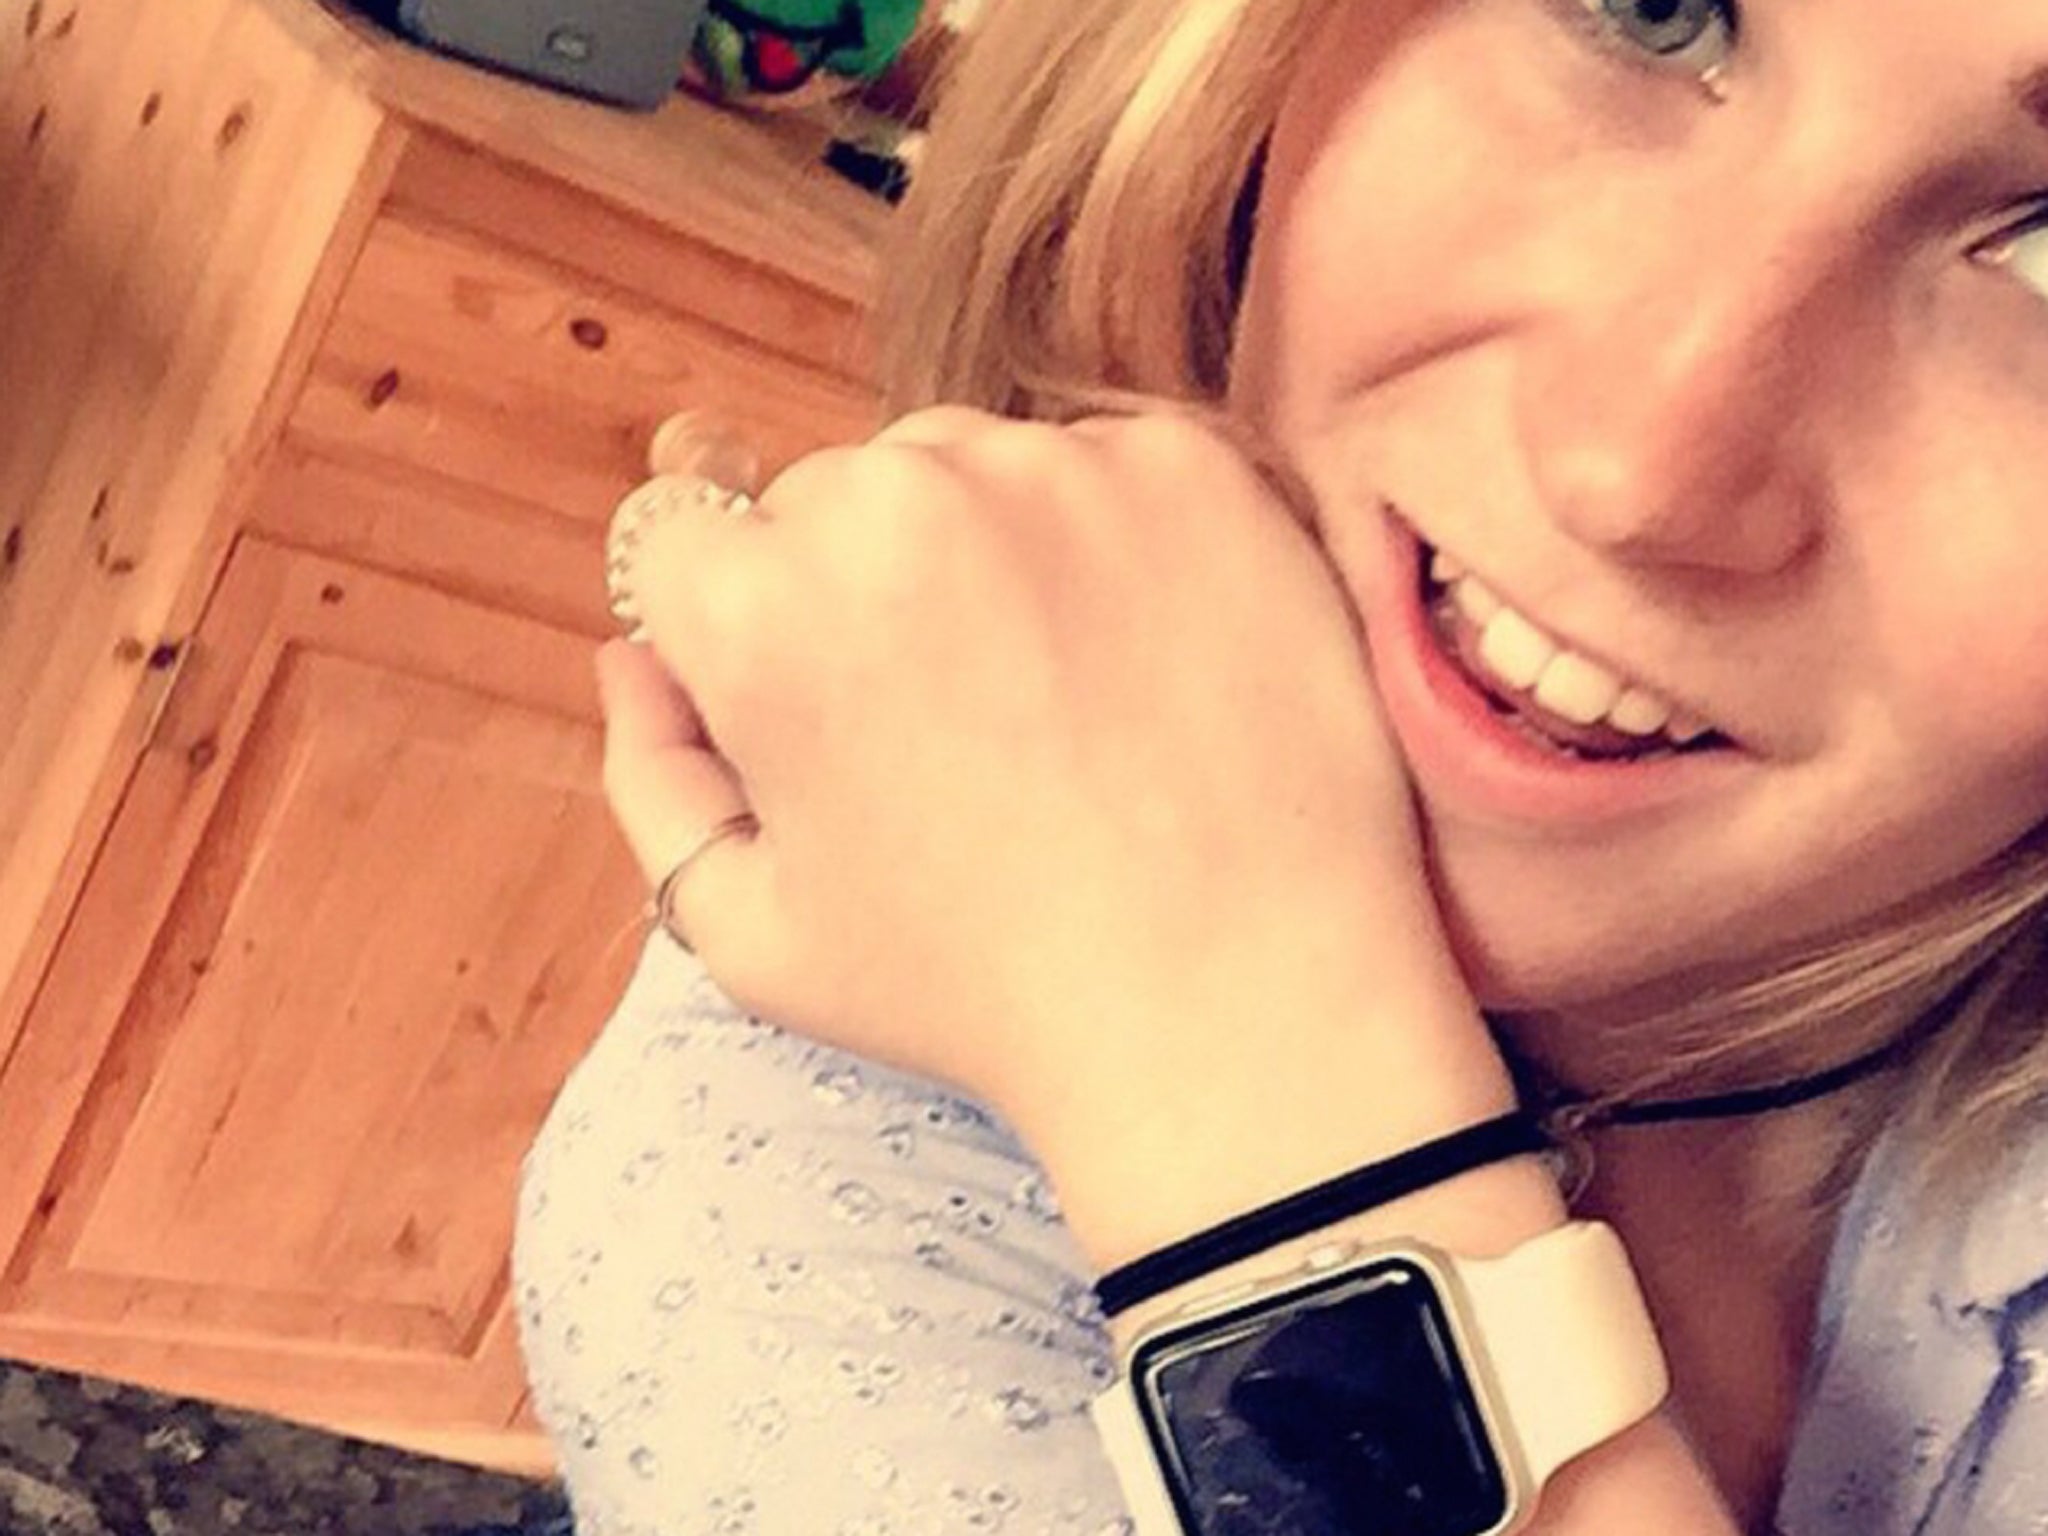 Molly Watt, wearing her Apple Watch Sport with a white band